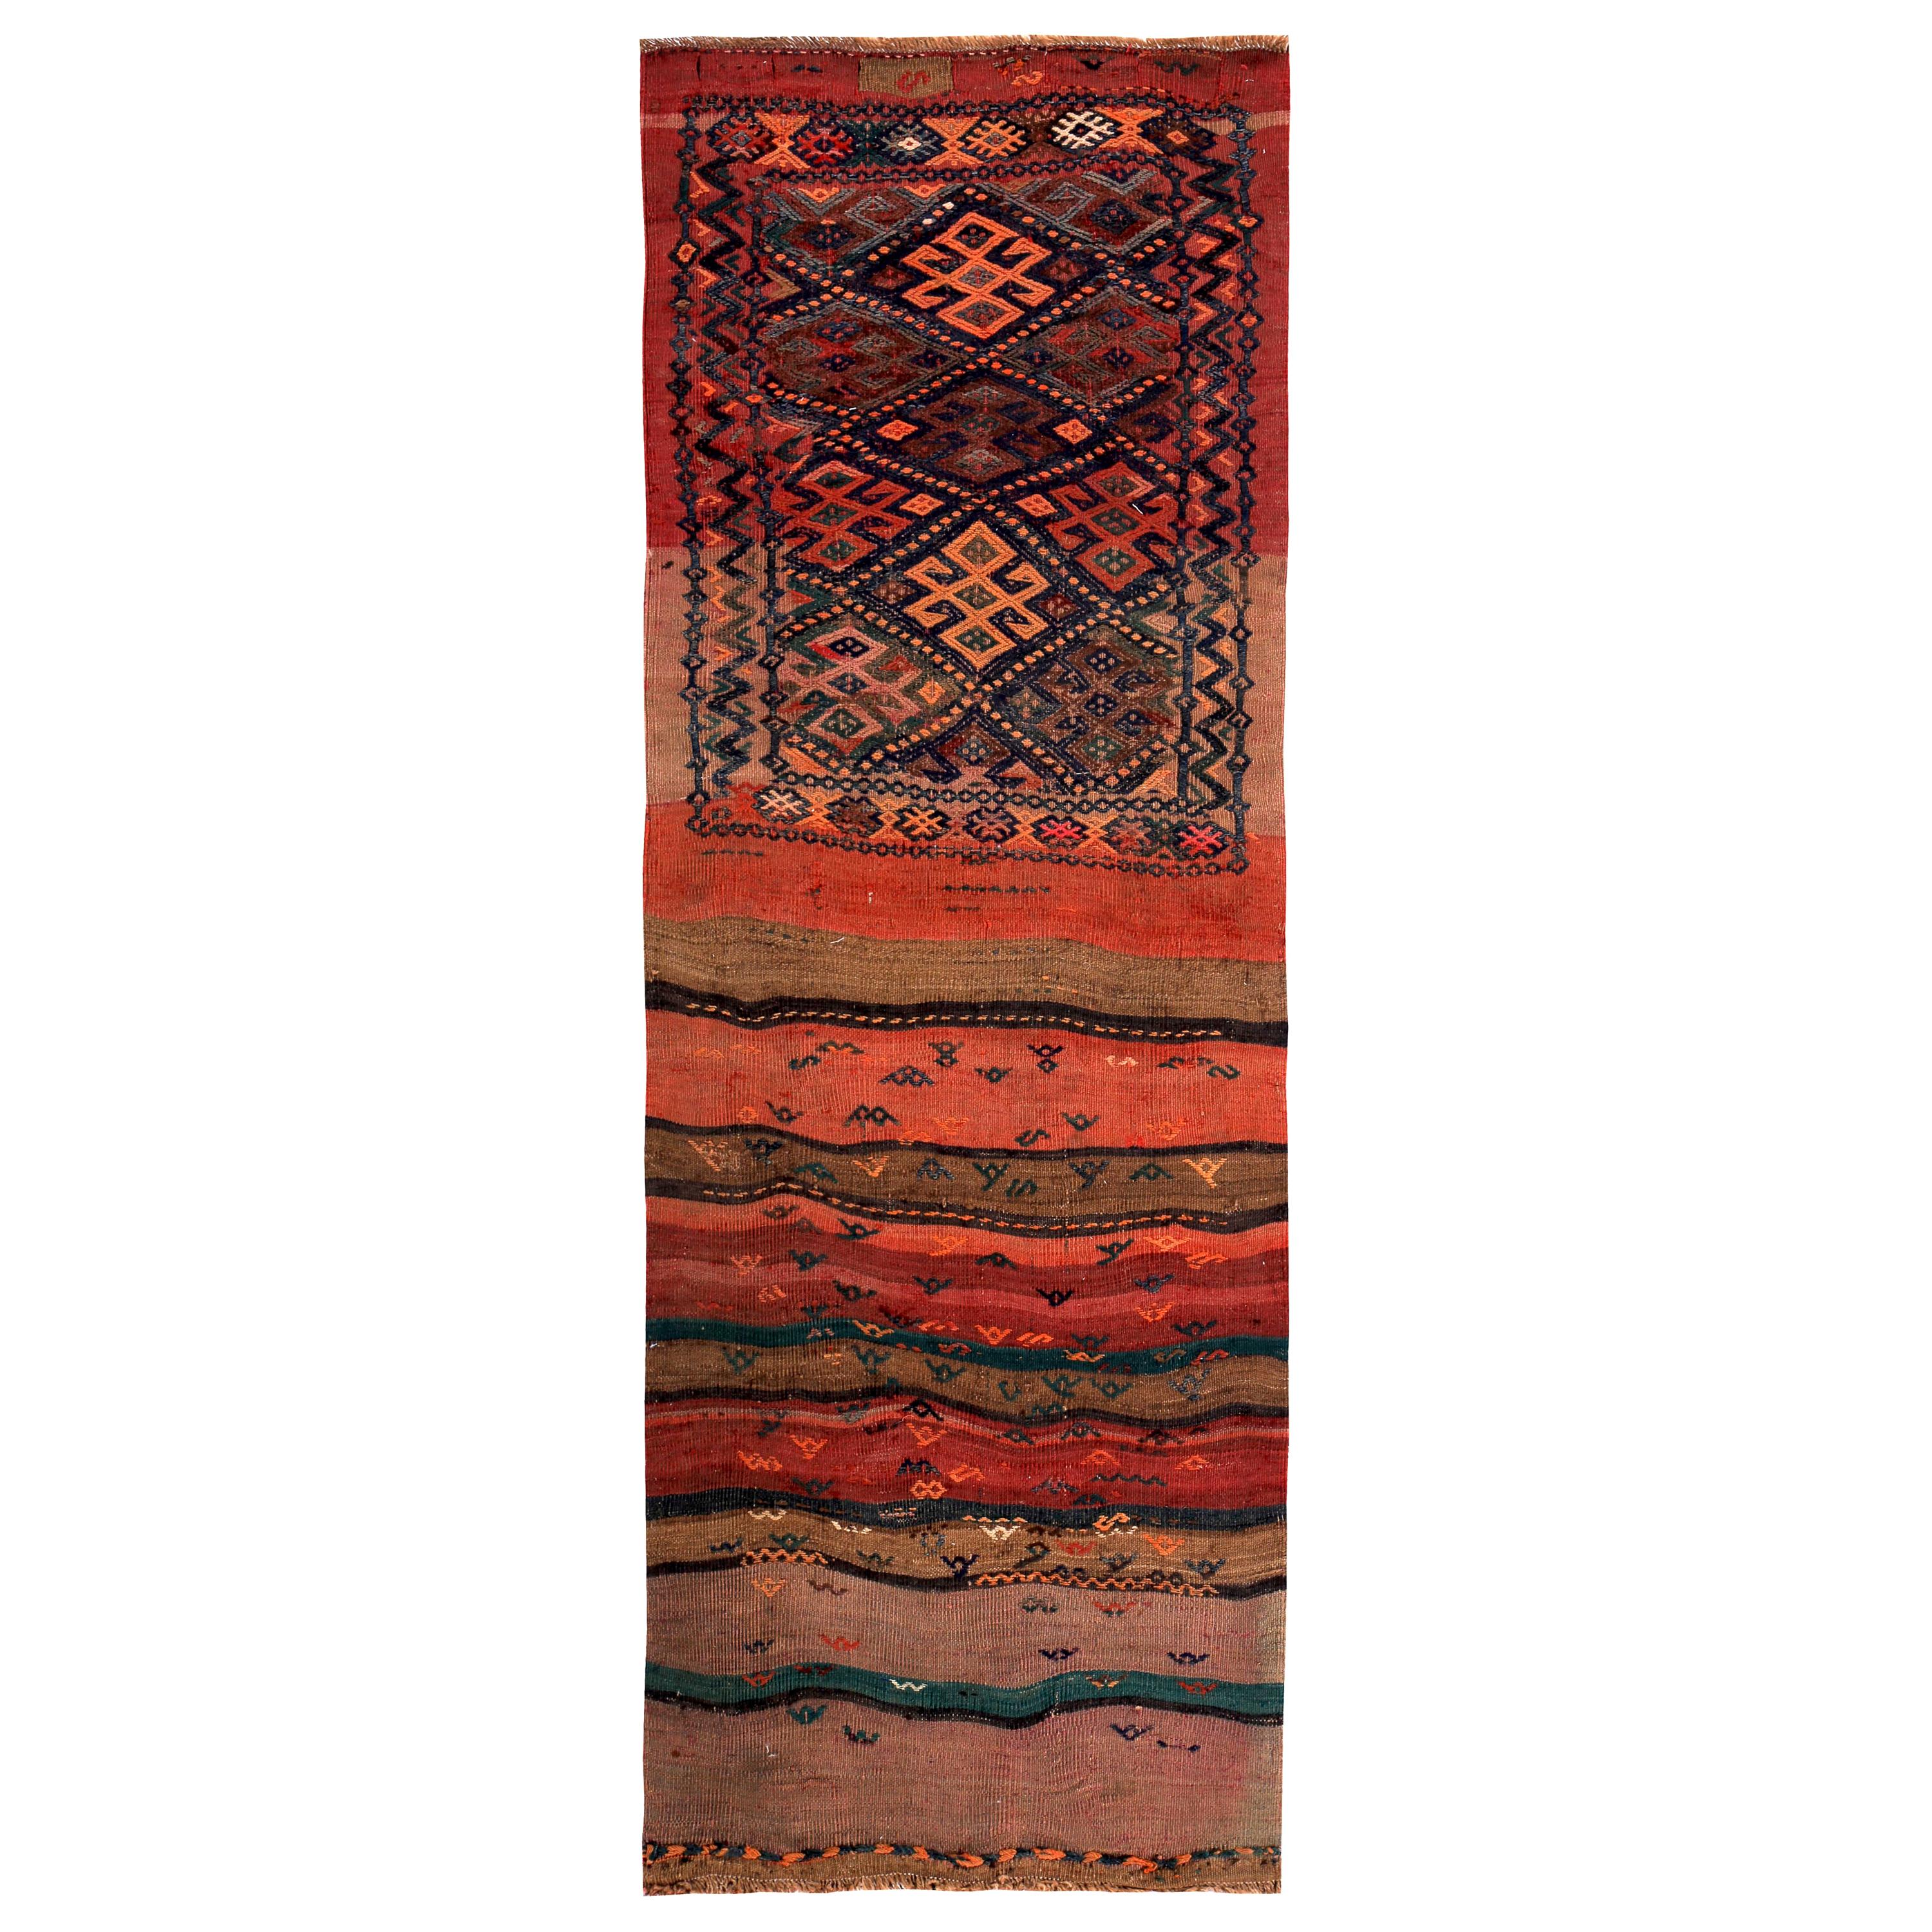 Turkish Kilim Rug in Red Orange and Tribal Stripes in Green and Brown